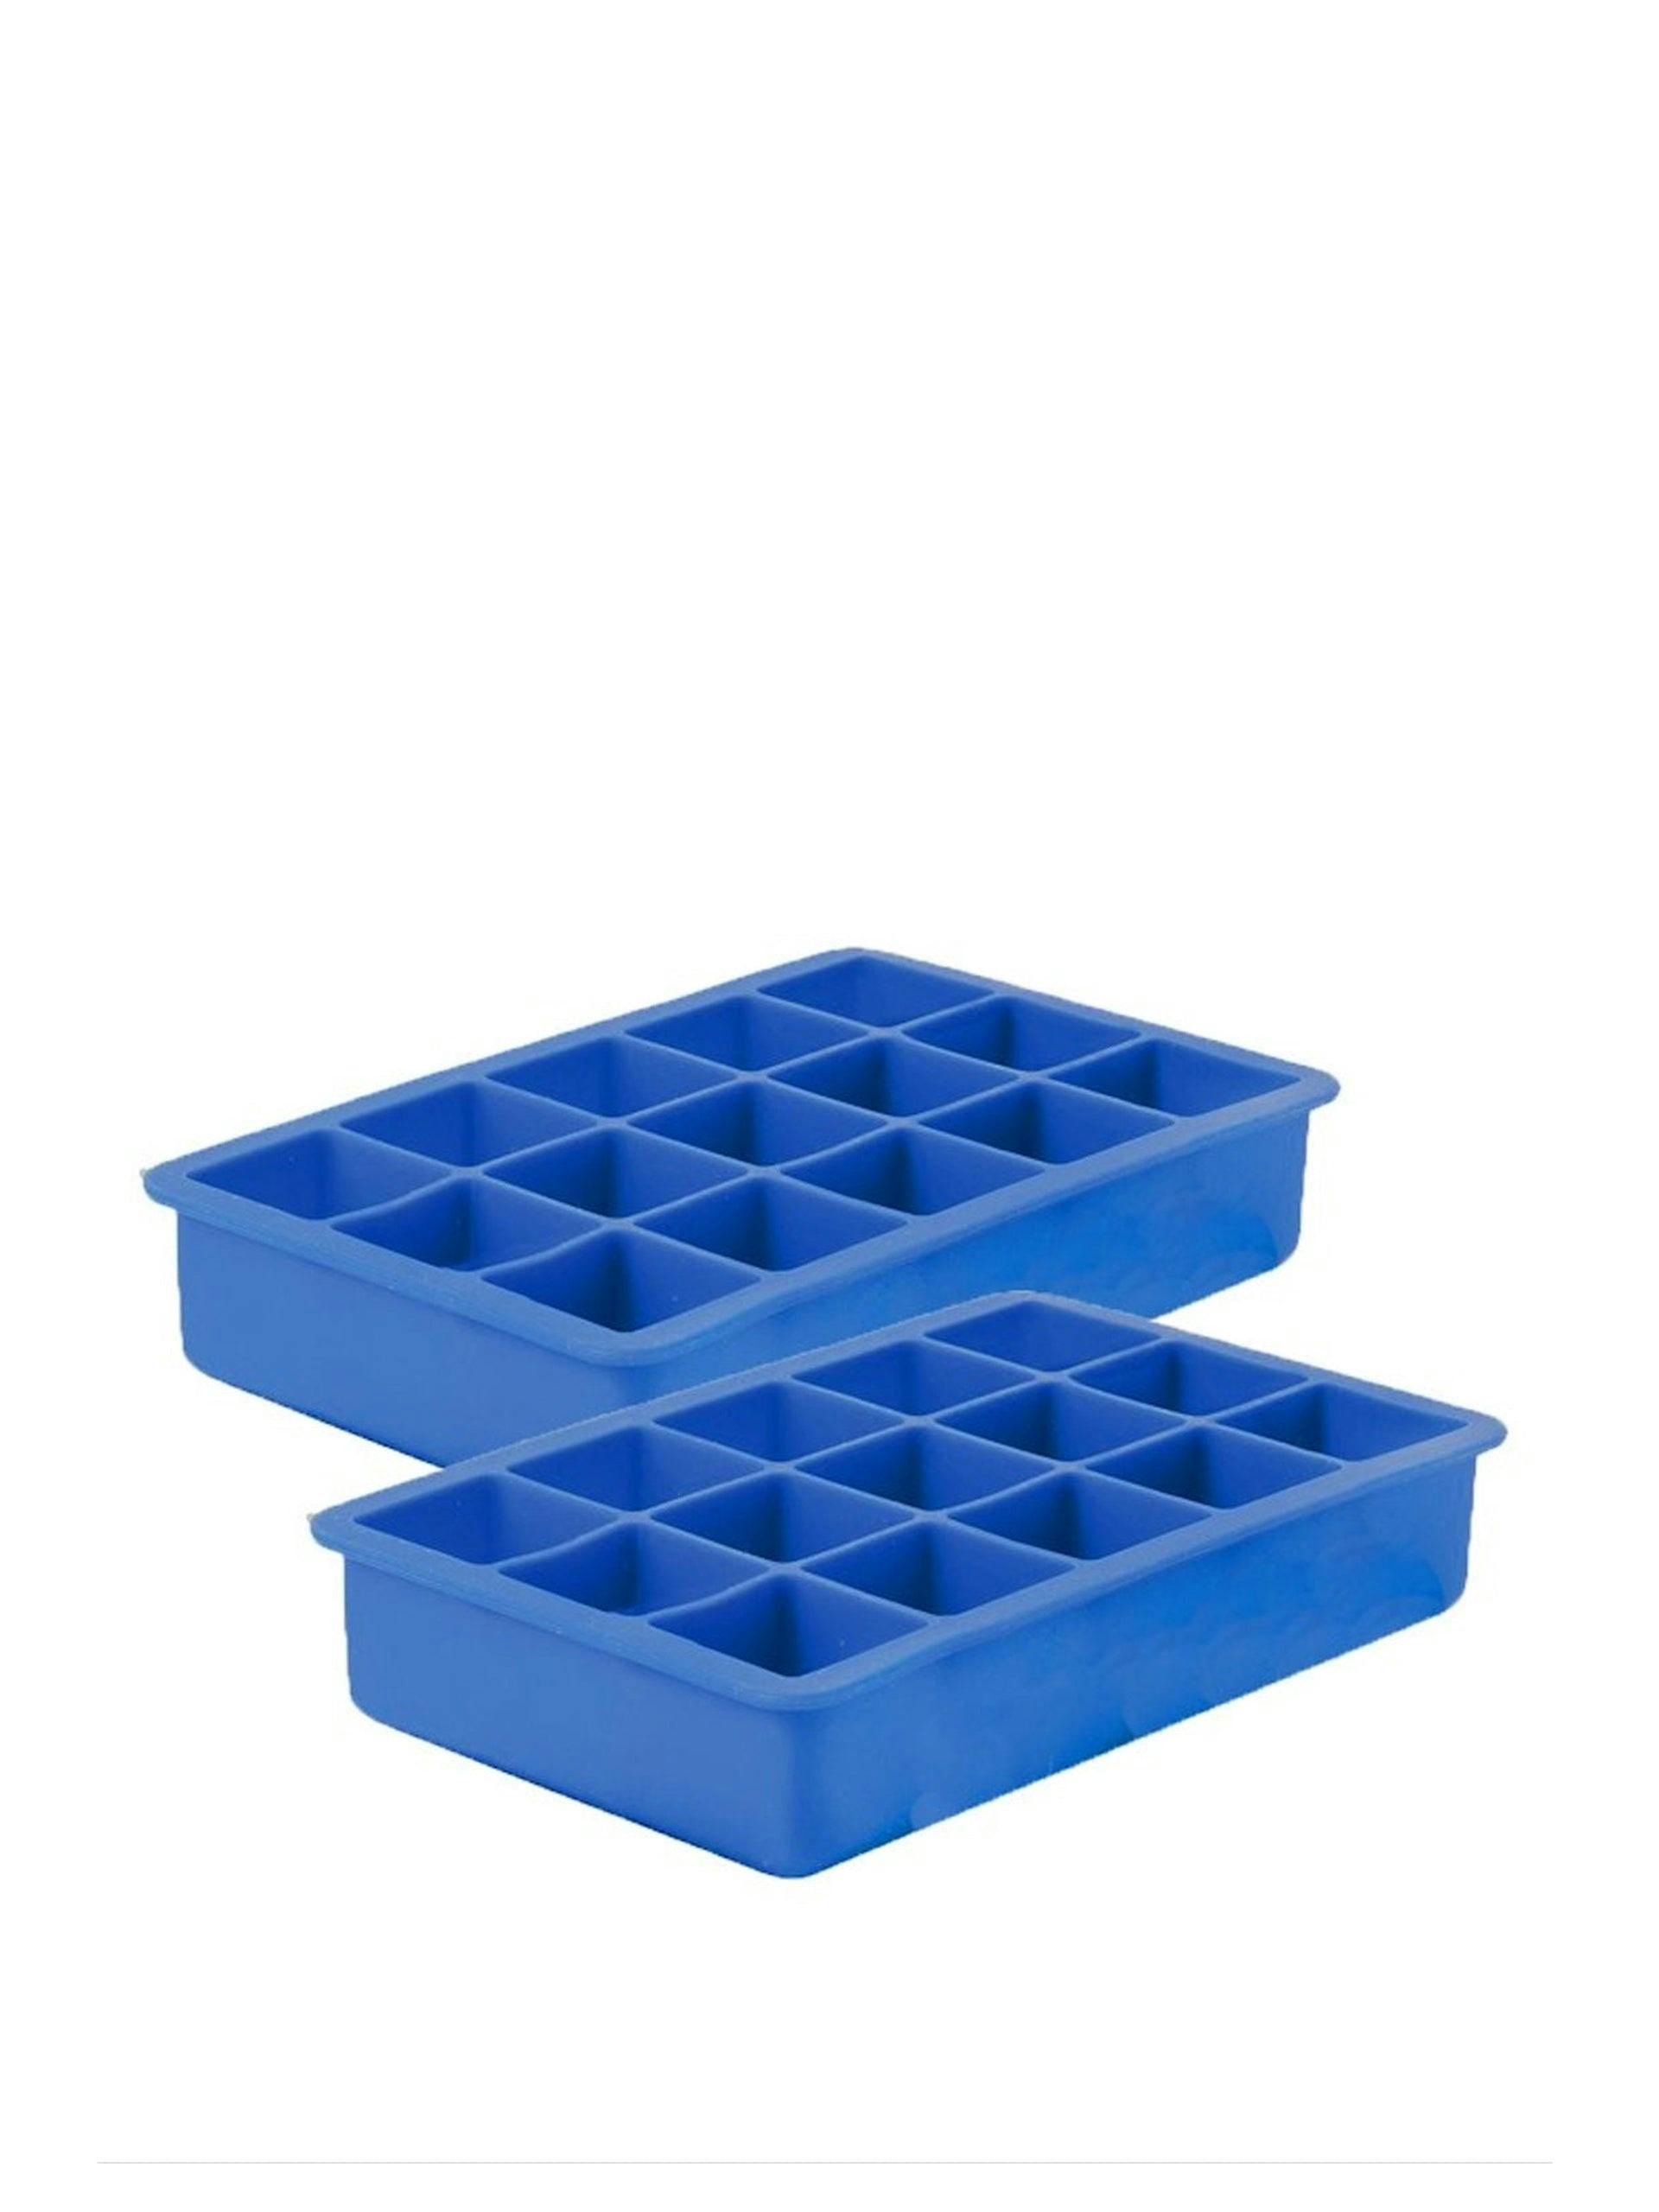 Perfect ice cube trays (set of 2)